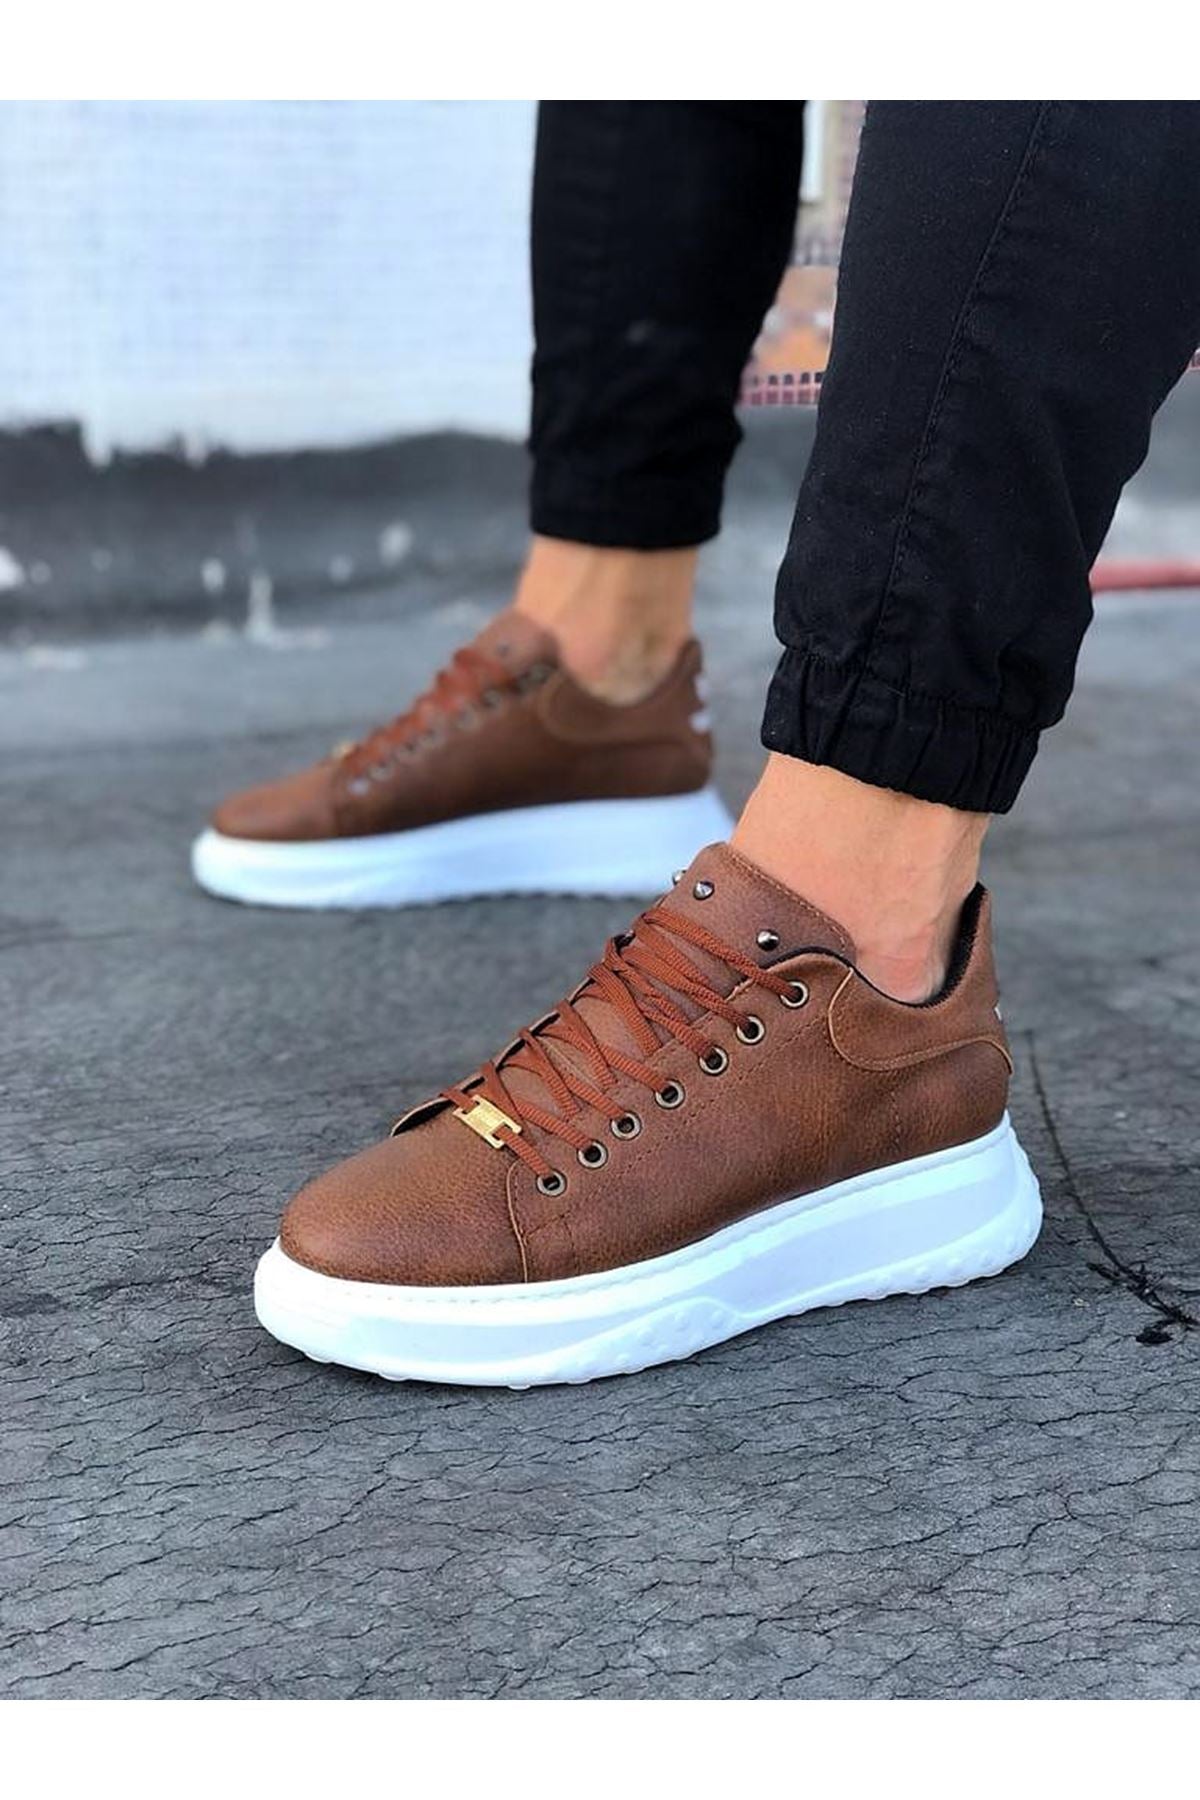 WG501 Tobacco Men's High-Sole Shoes sneakers - STREETMODE™